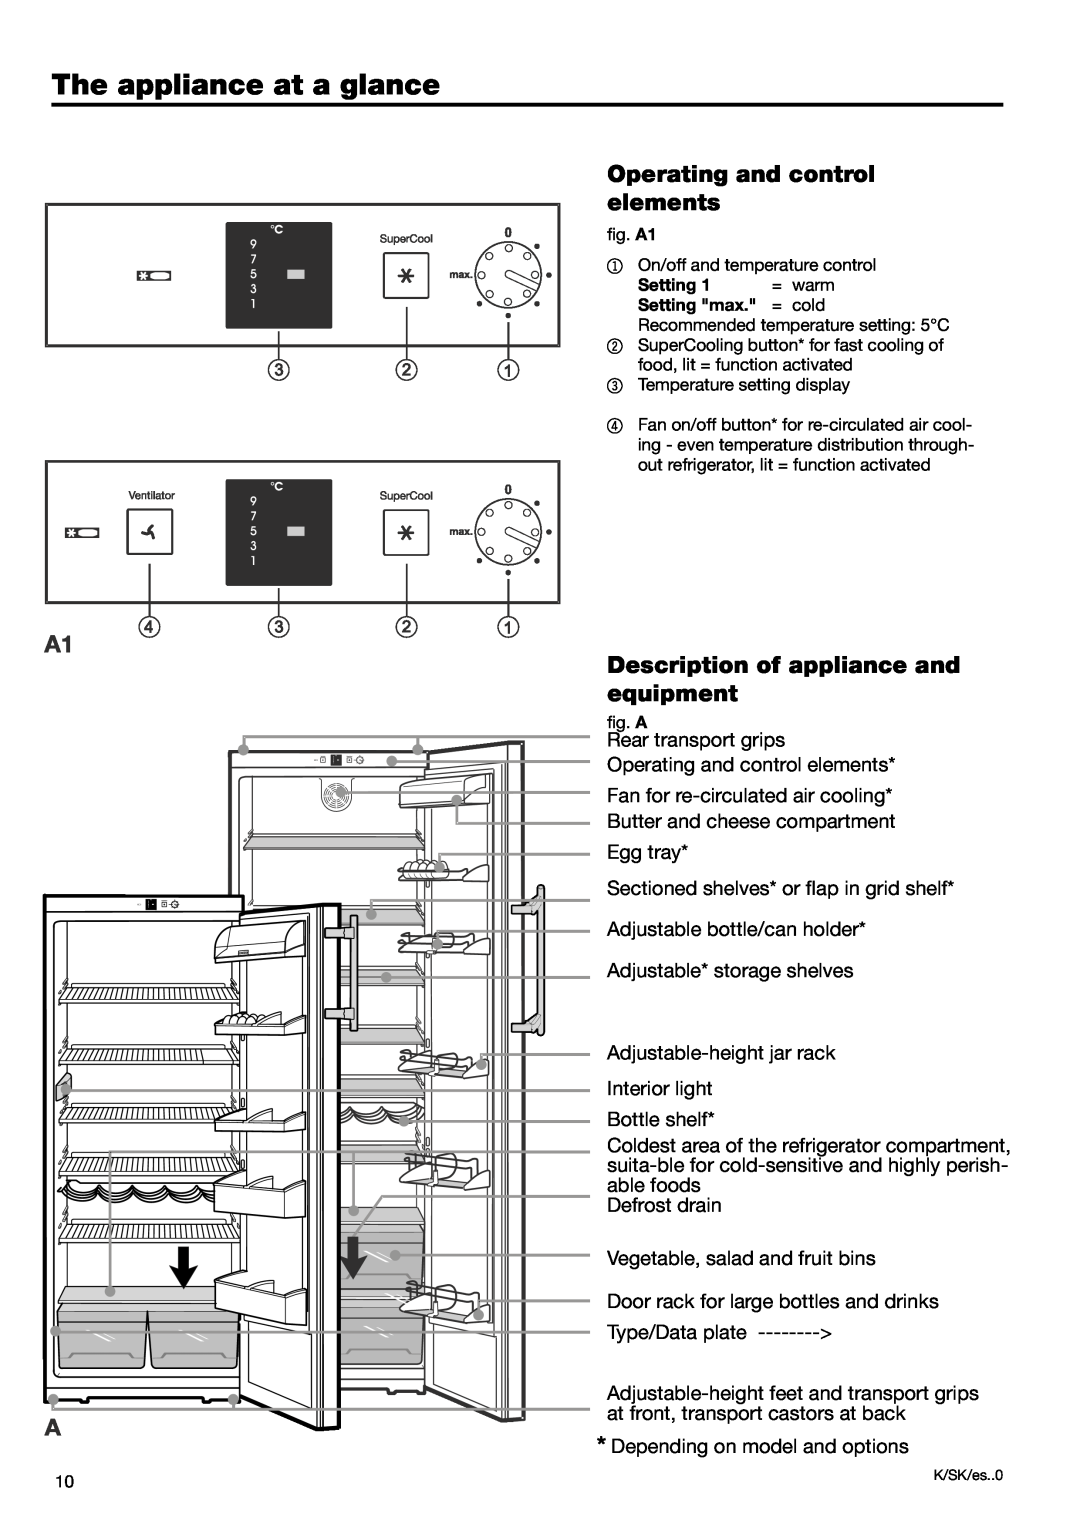 Liebherr 7082 218-03 The appliance at a glance, Operating and control elements, Description of appliance and equipment 